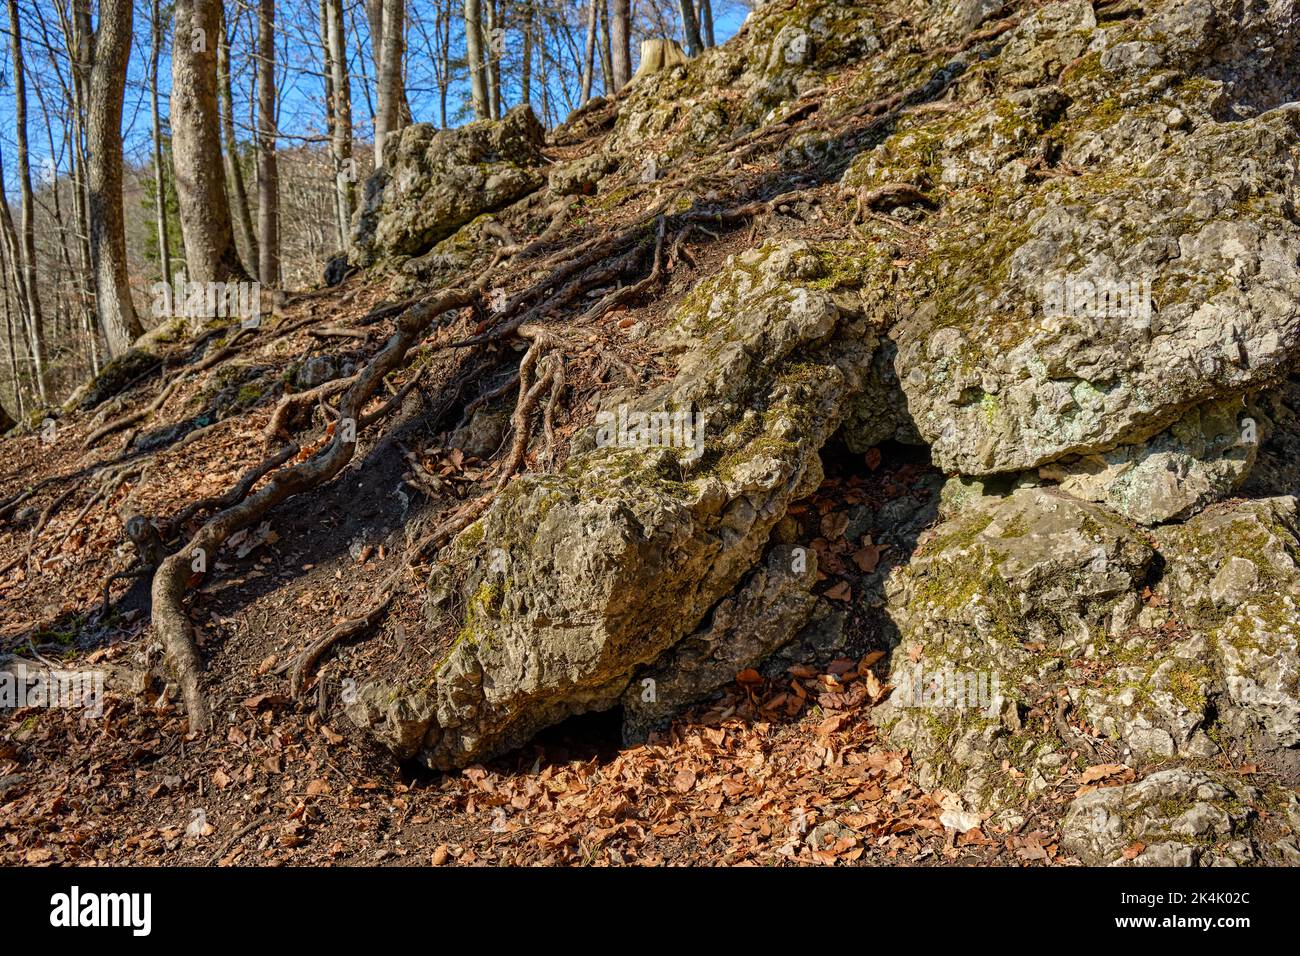 Root system of trees and protruding limestone rock, here on the basis of a forest area in the Swabian Alb near Burladingen, Baden-Wurttemberg, Germany. Stock Photo